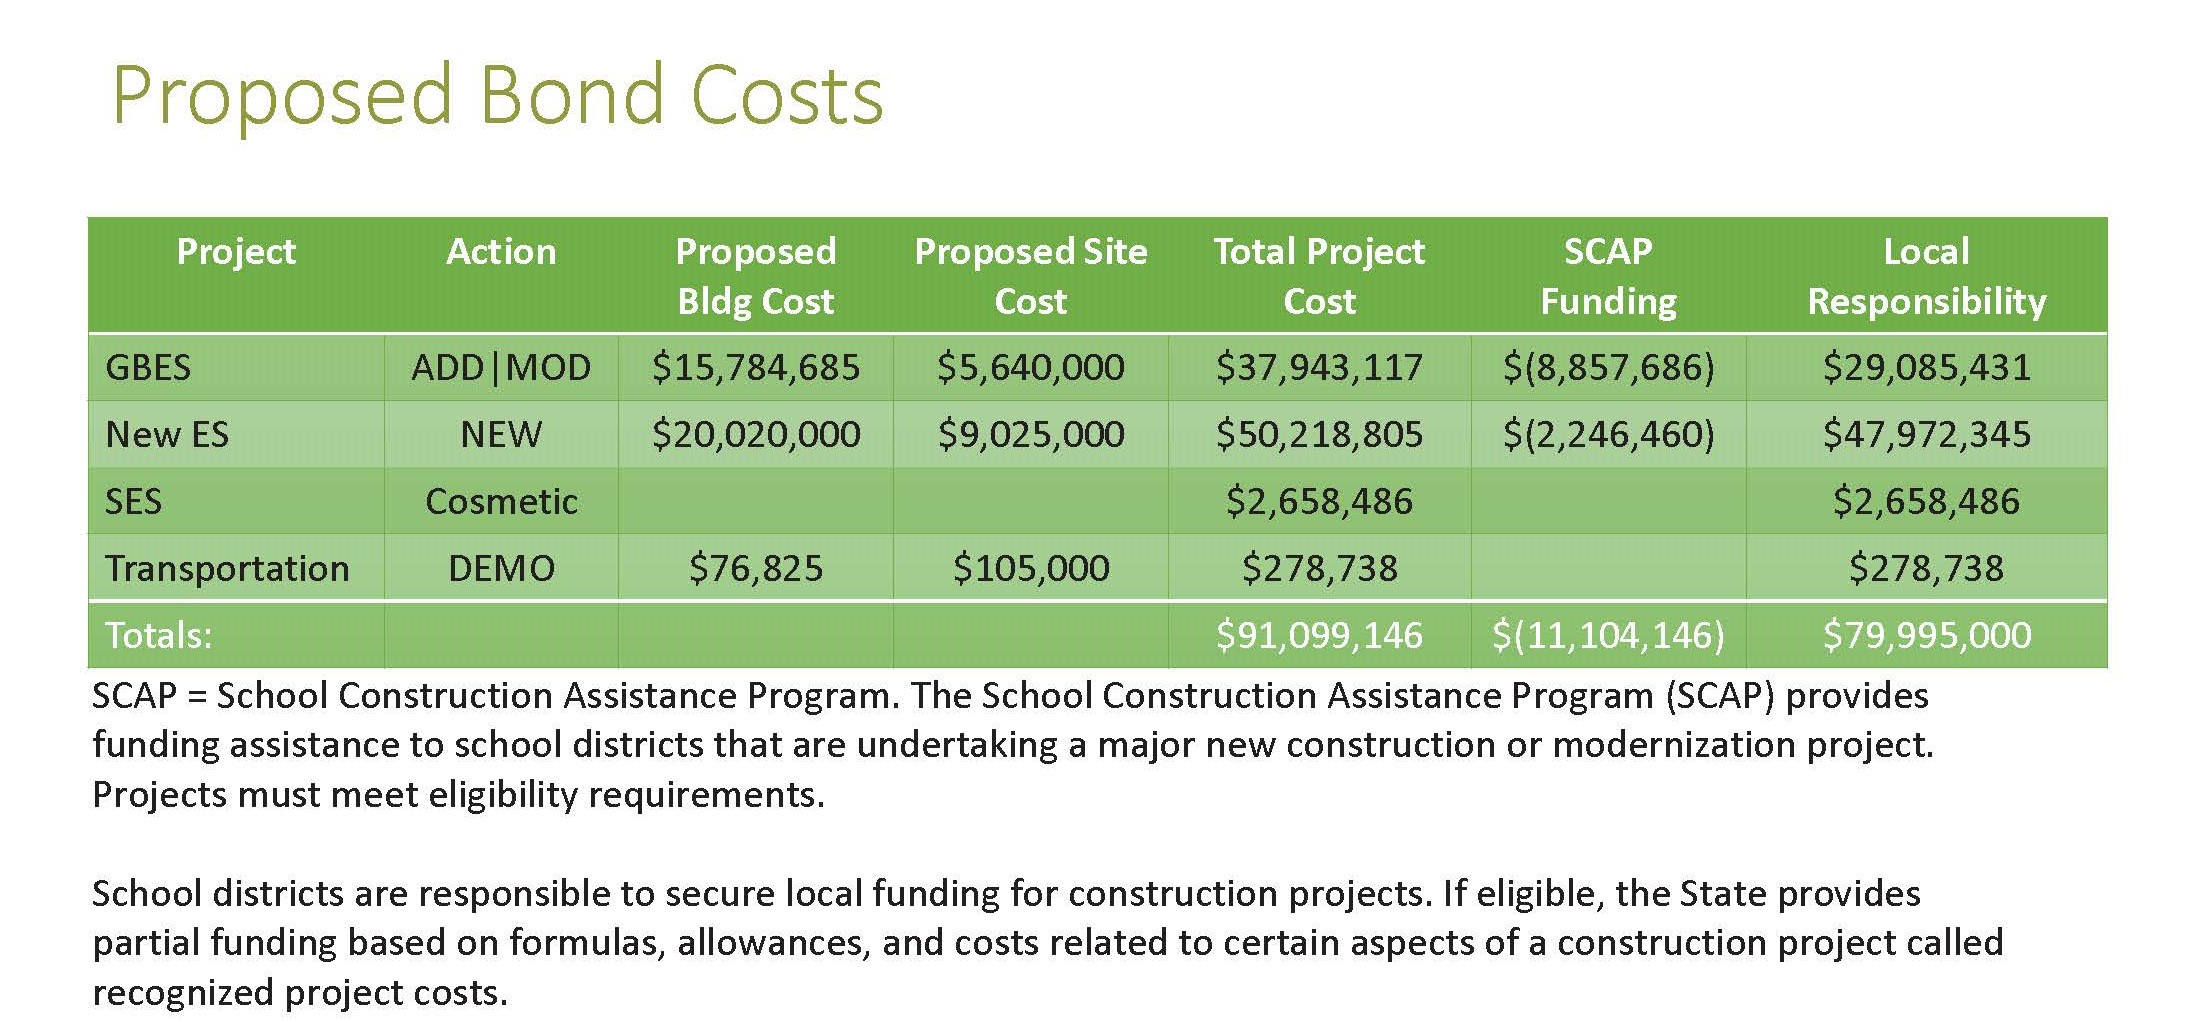 Proposed bond costs